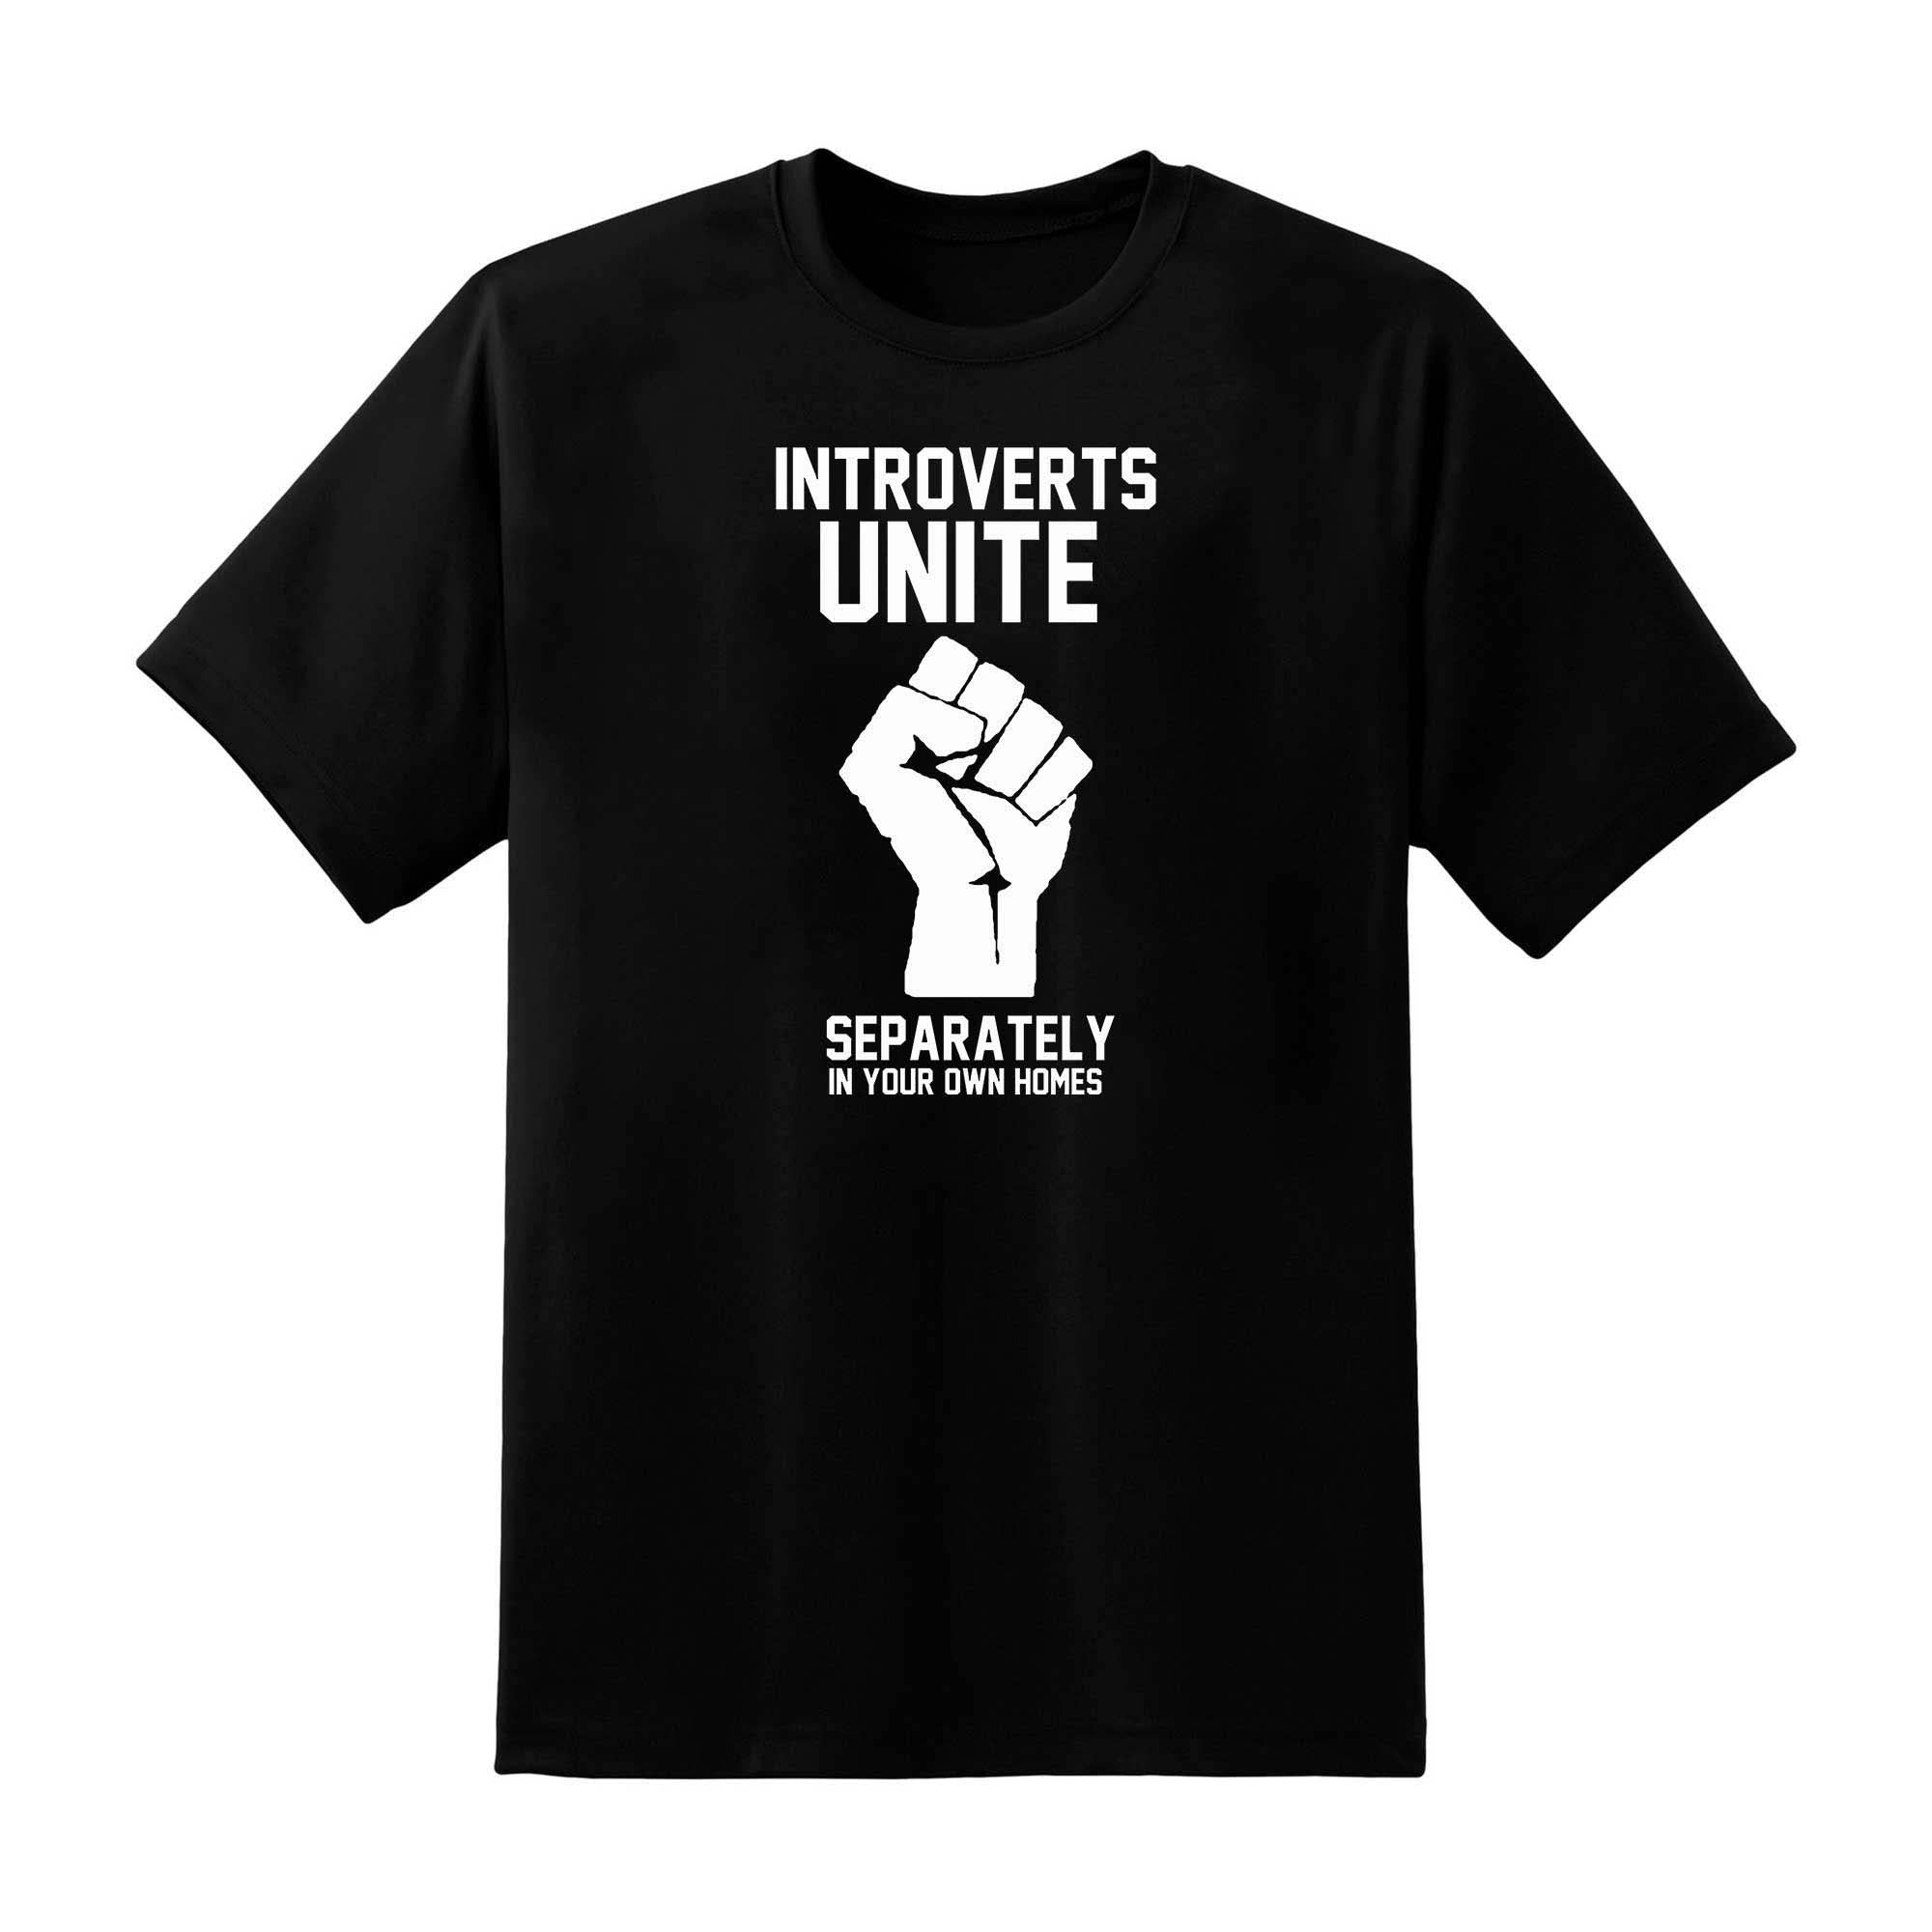 Skitongift Skitongift Introverts Unite Separately In Your Own Homes Essential T Shirt Funny Shirts